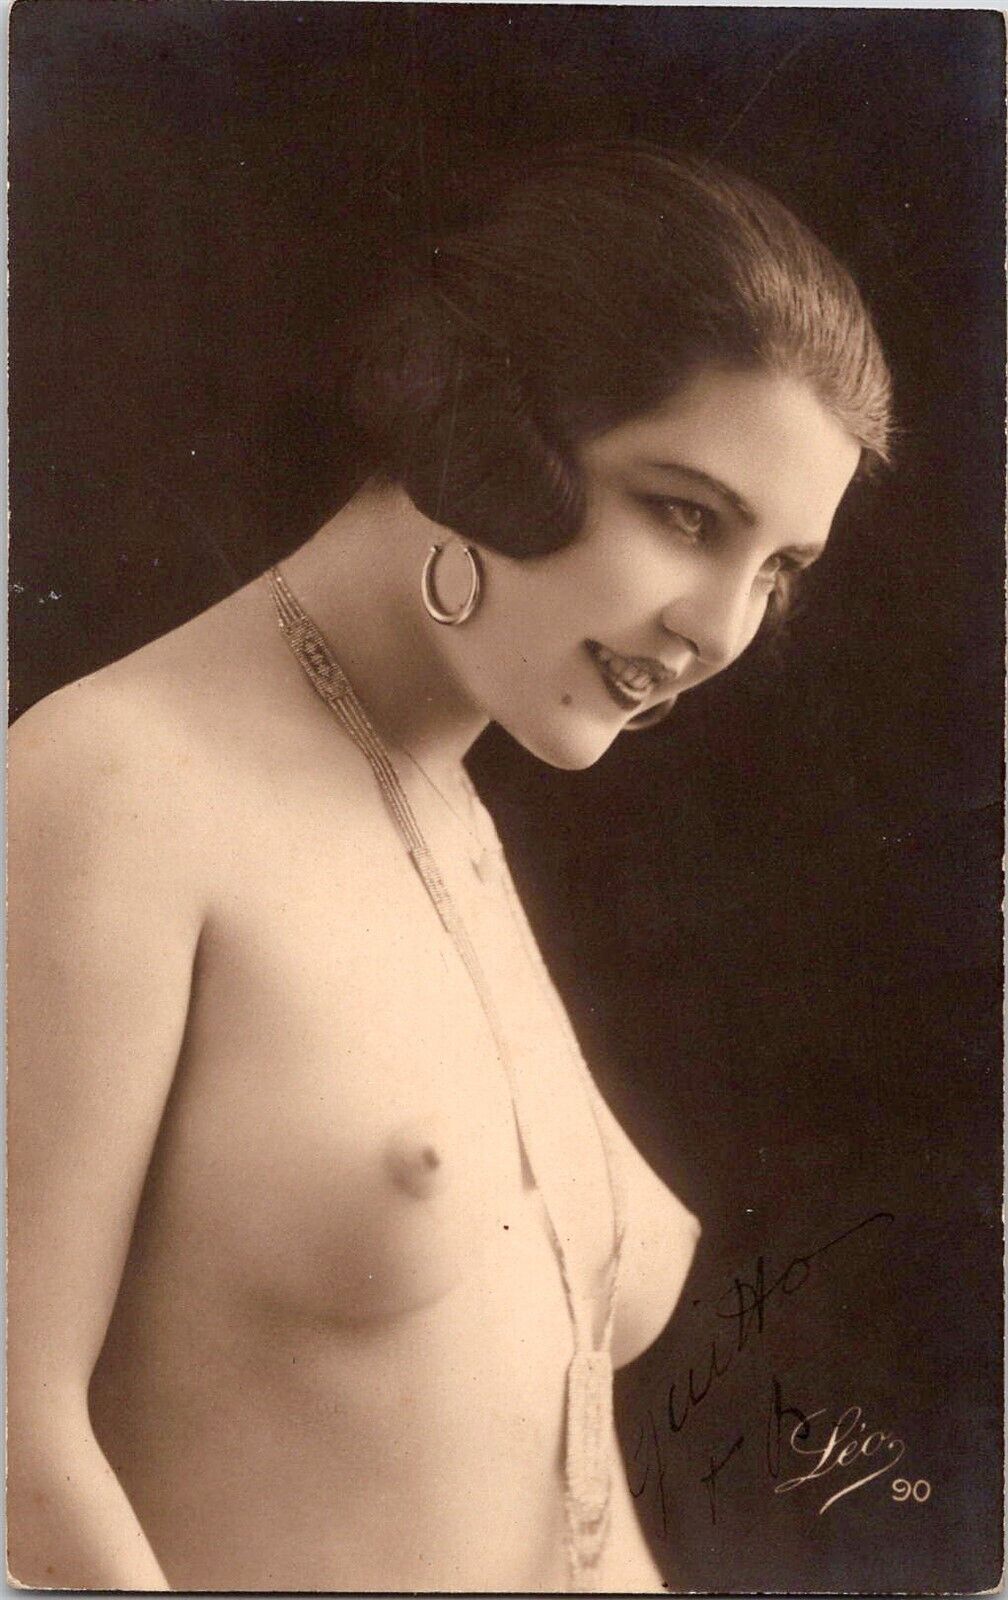 Jeanne Juilla close-up French nude woman original old 1920s photo postcard